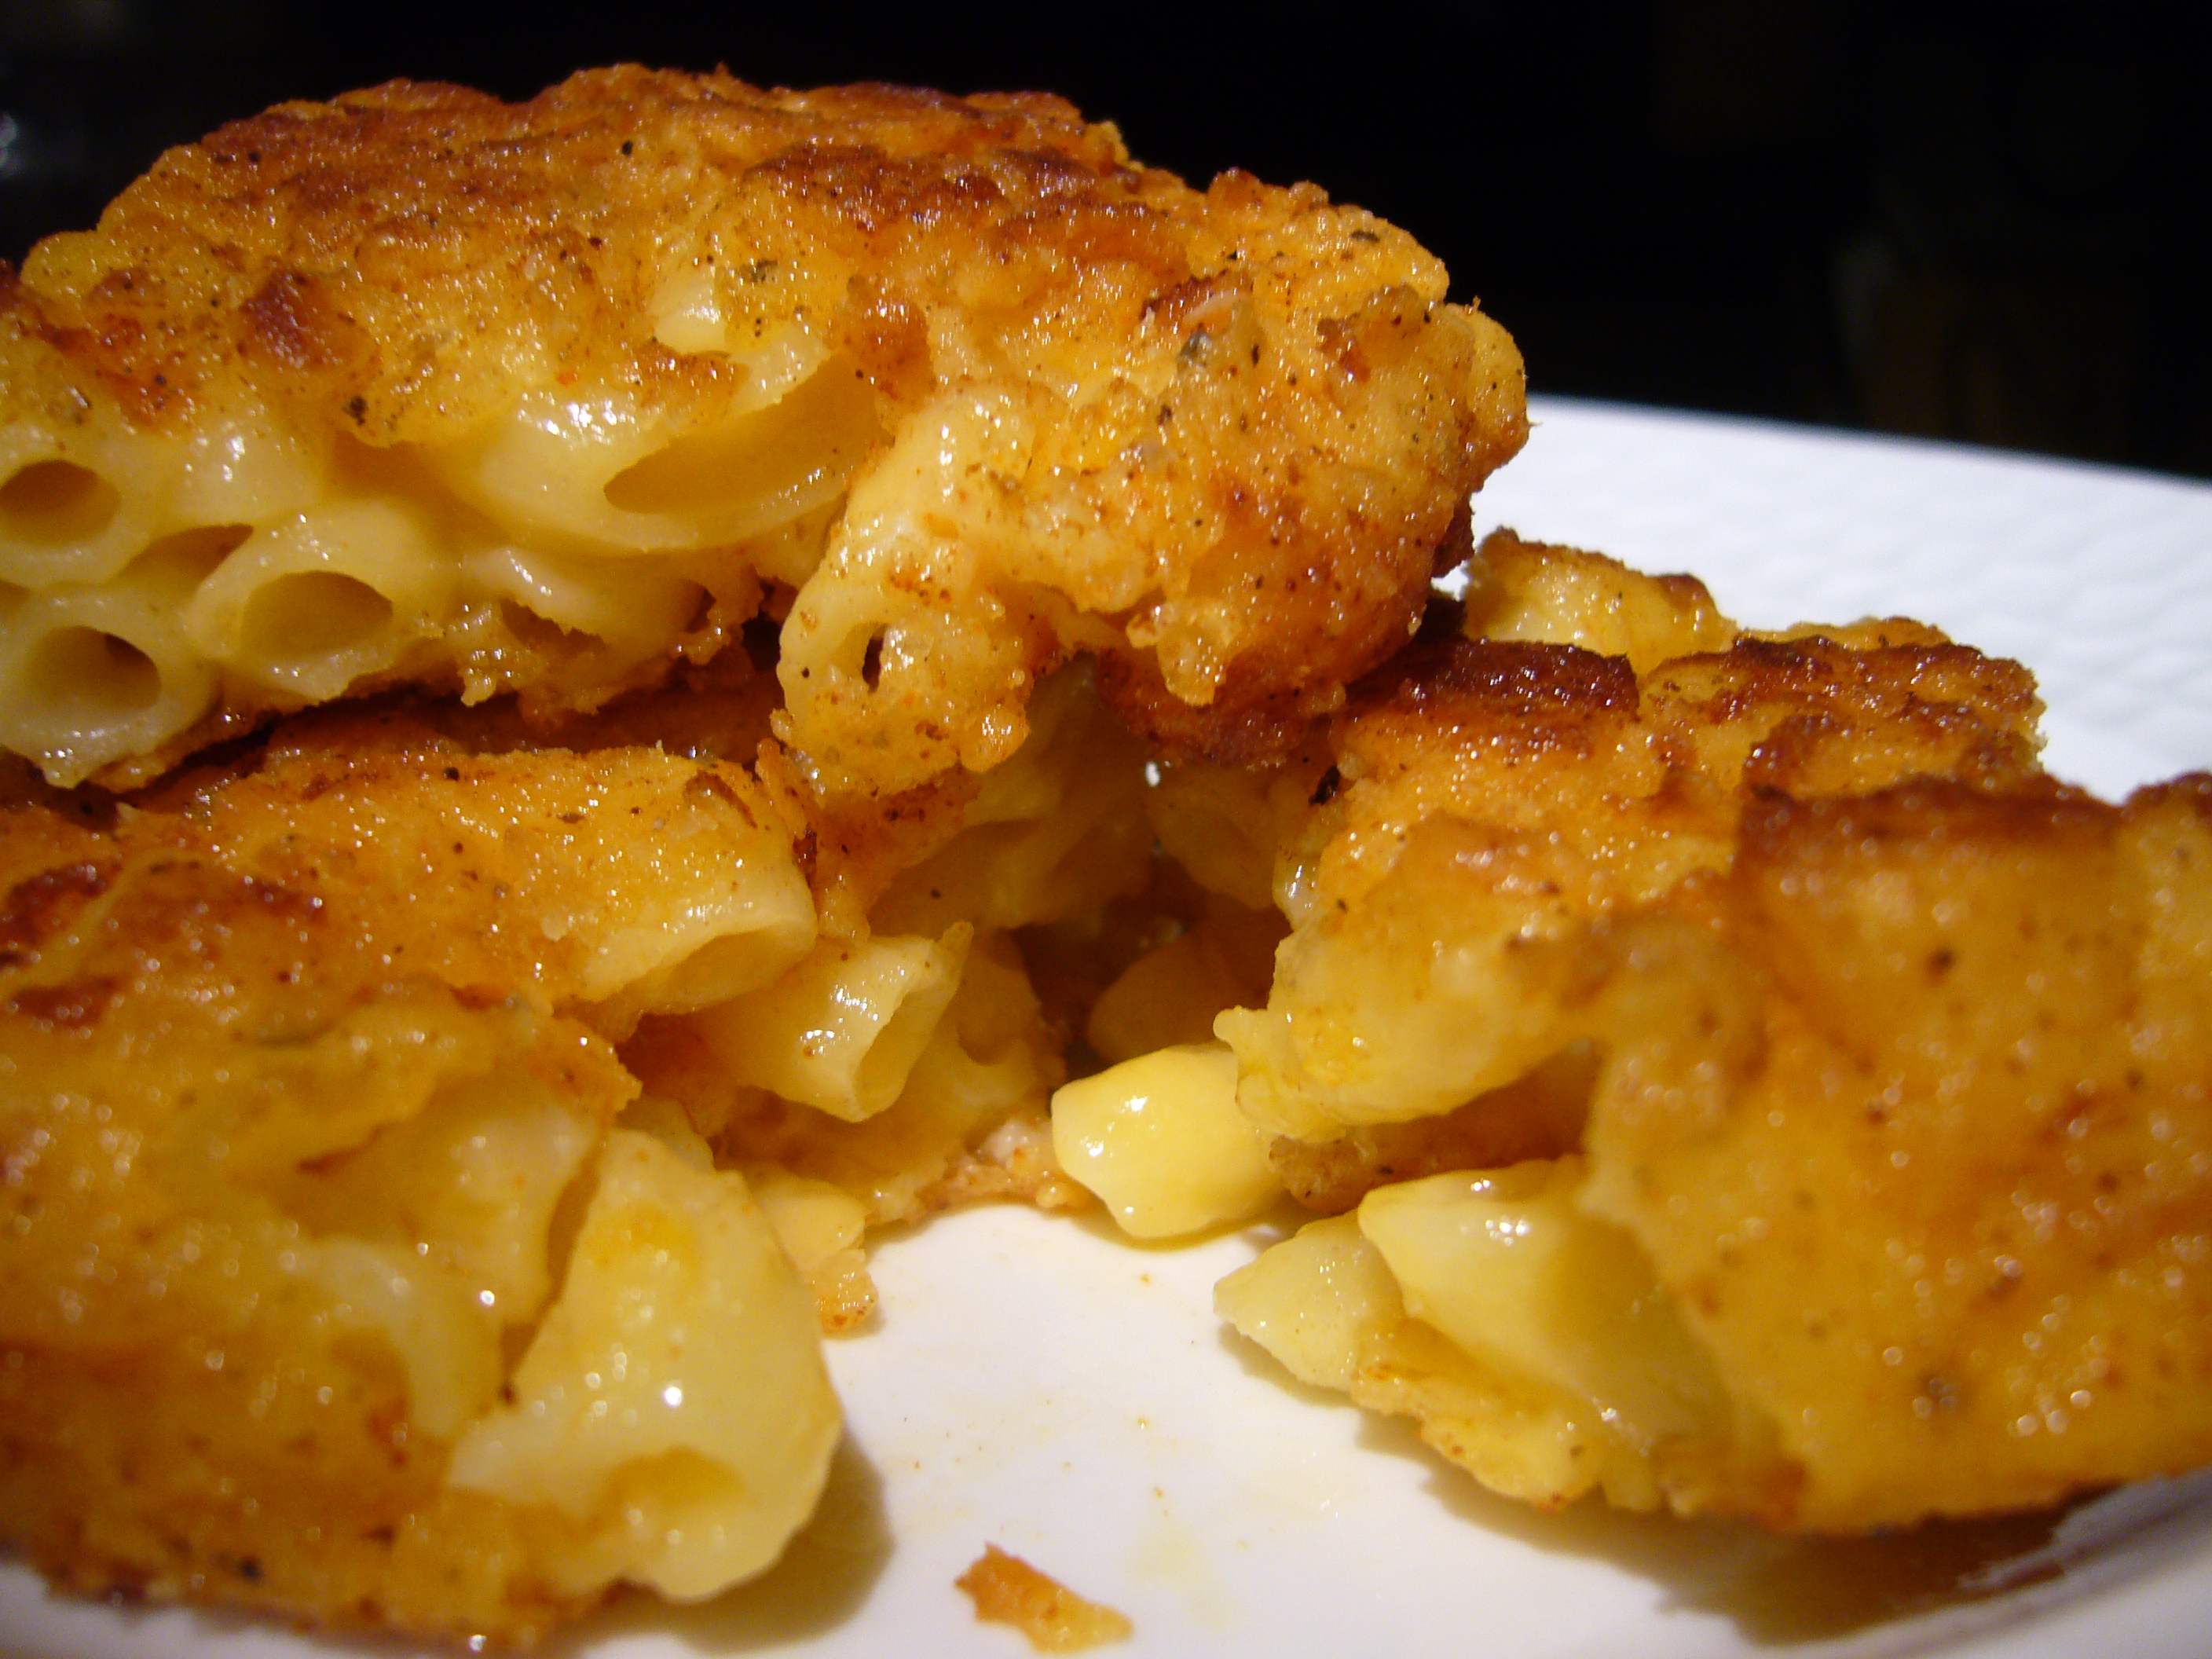 Macaroni And Cheese With Fried Chicken